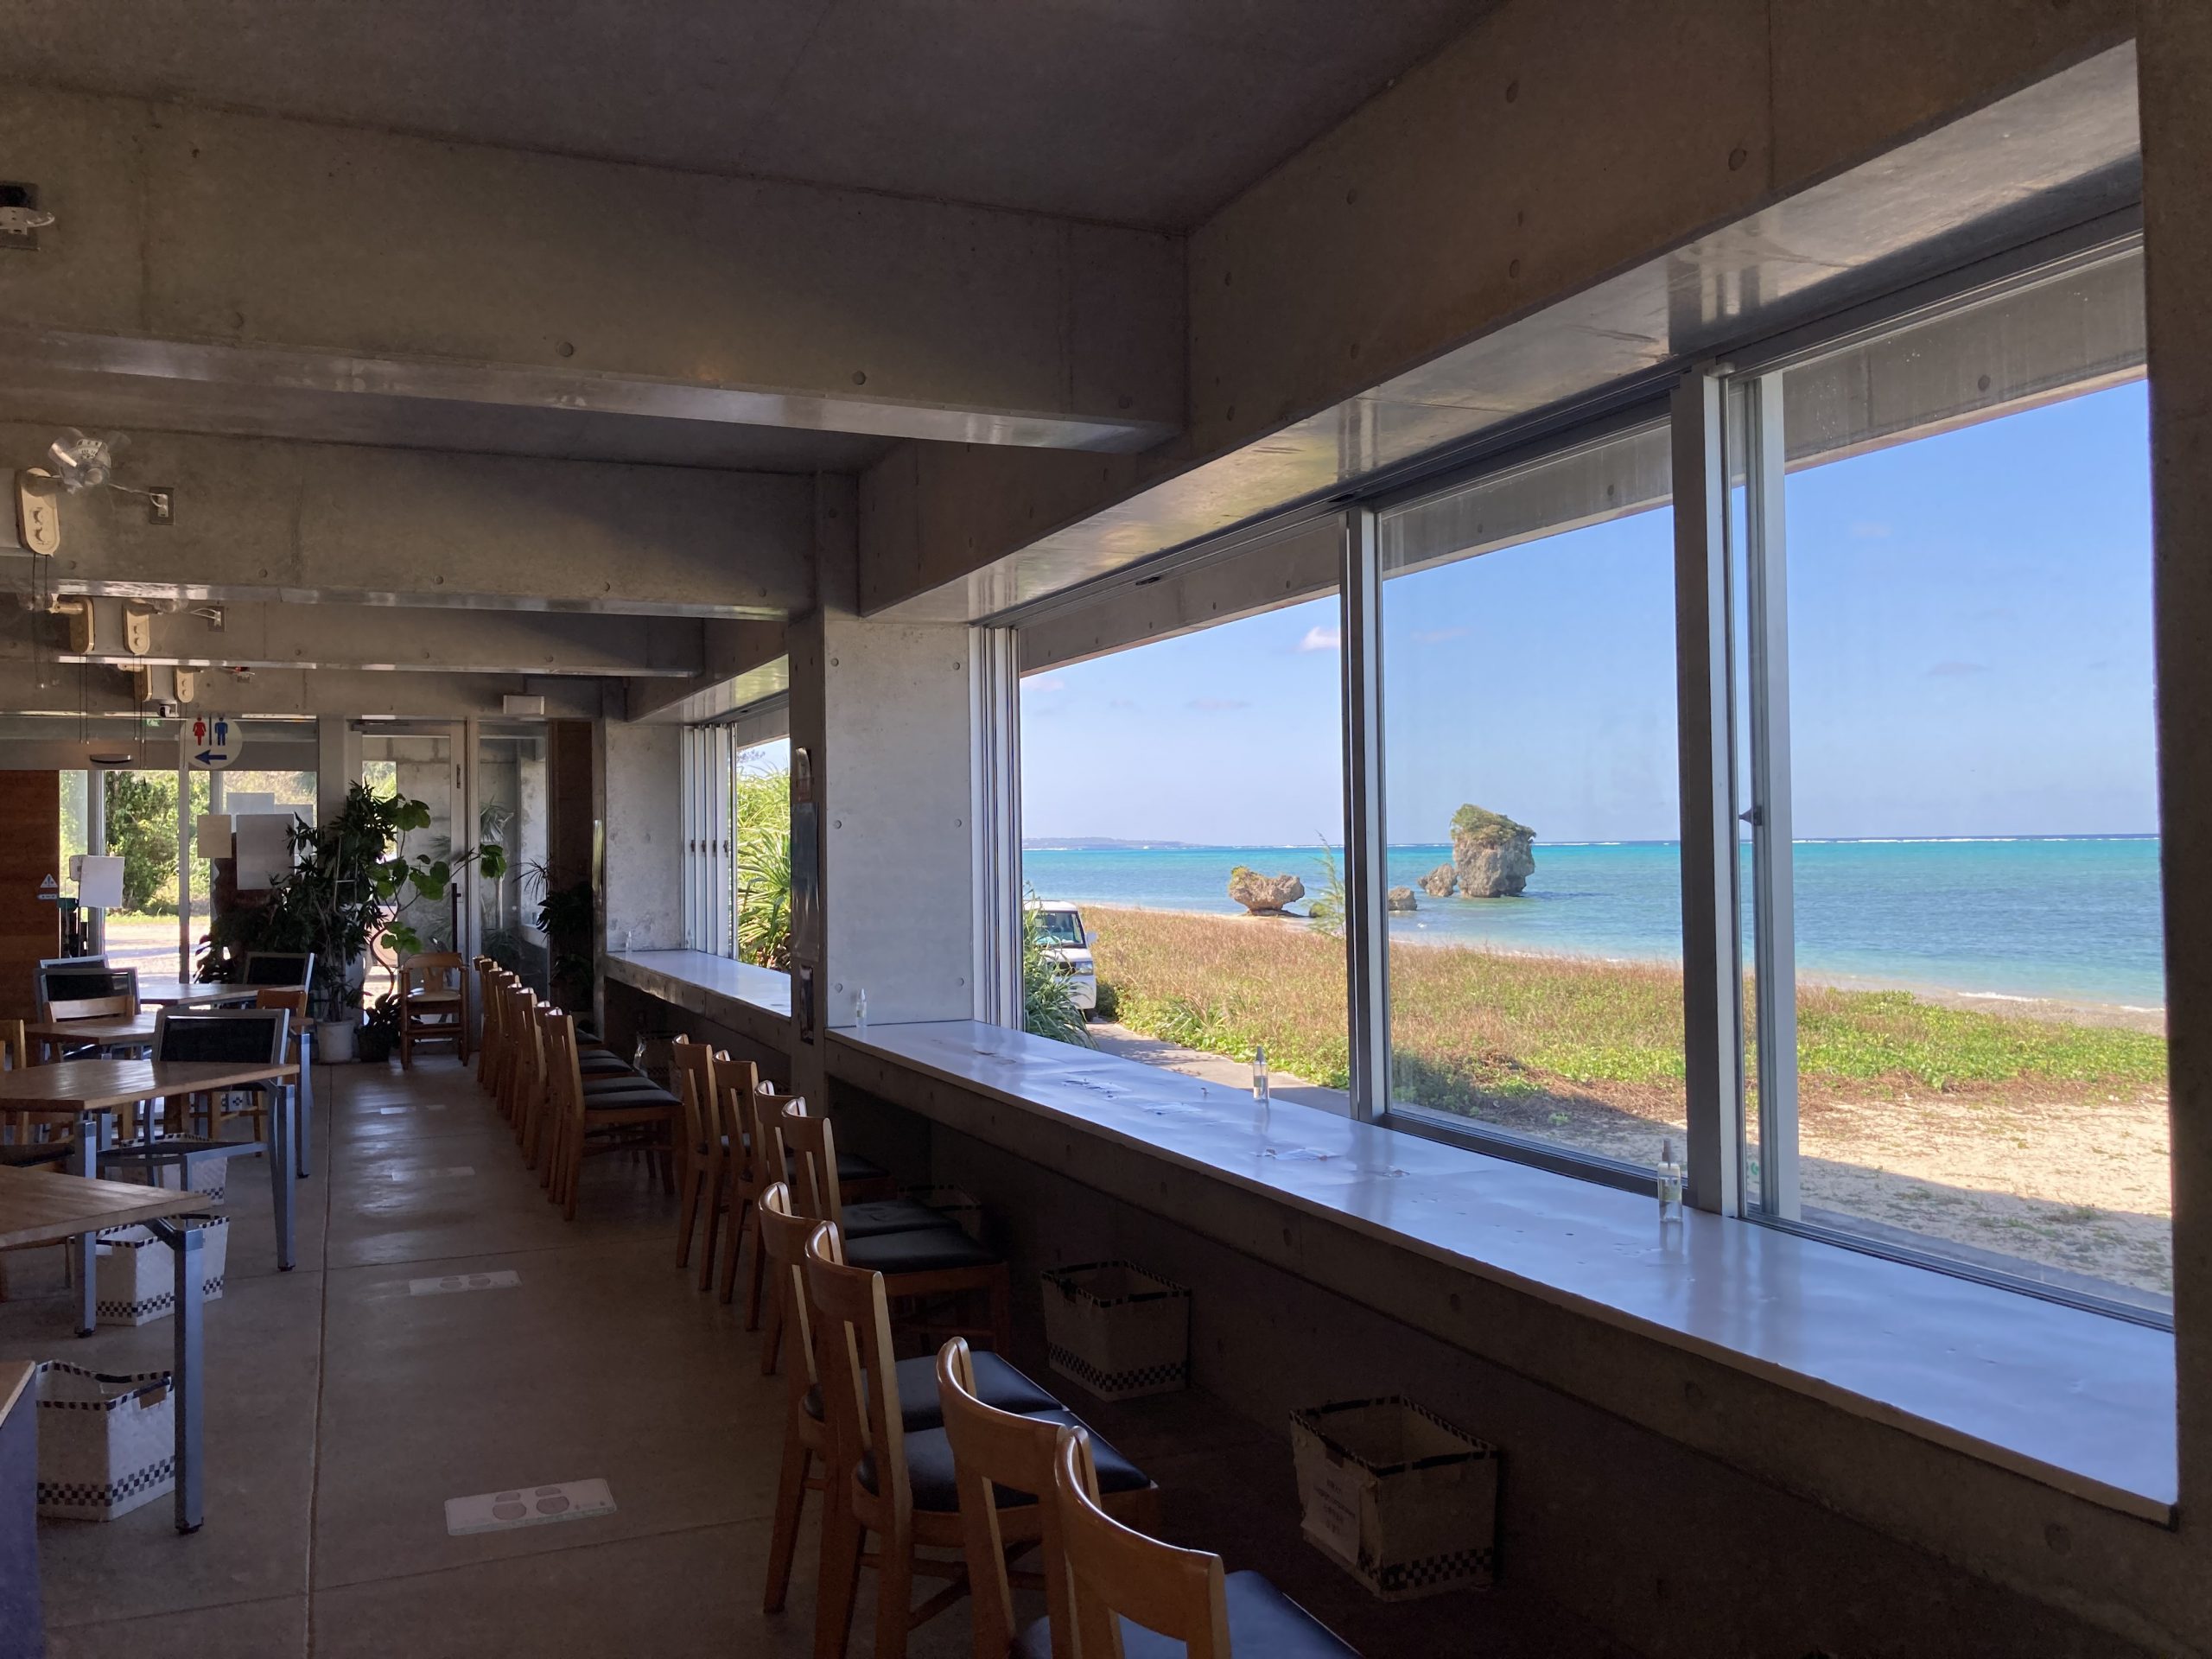 On the Beach CAFE　今帰仁村